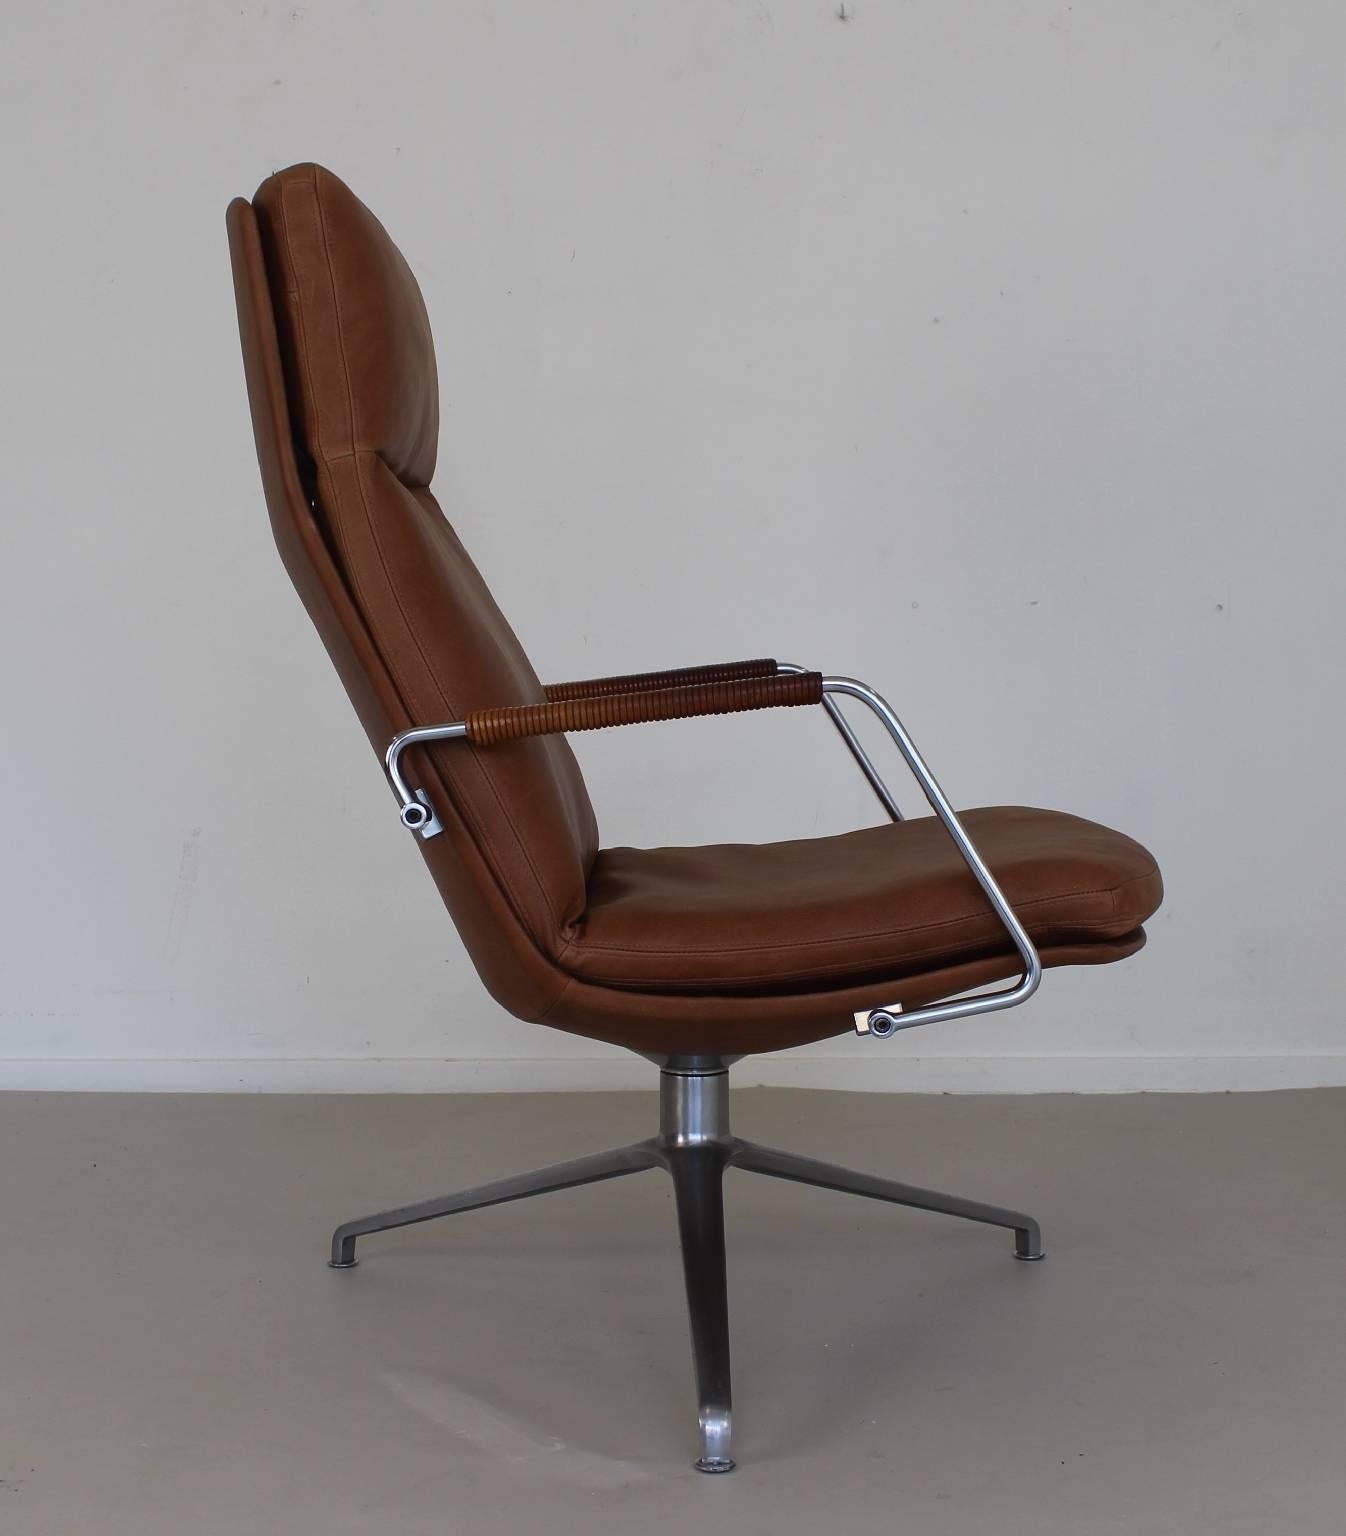 Superb design office chair.
Tripod brushed steel base.
Revolving tub.
Re-upholstered in best brown leather.
Leather wrapped steel armrests.